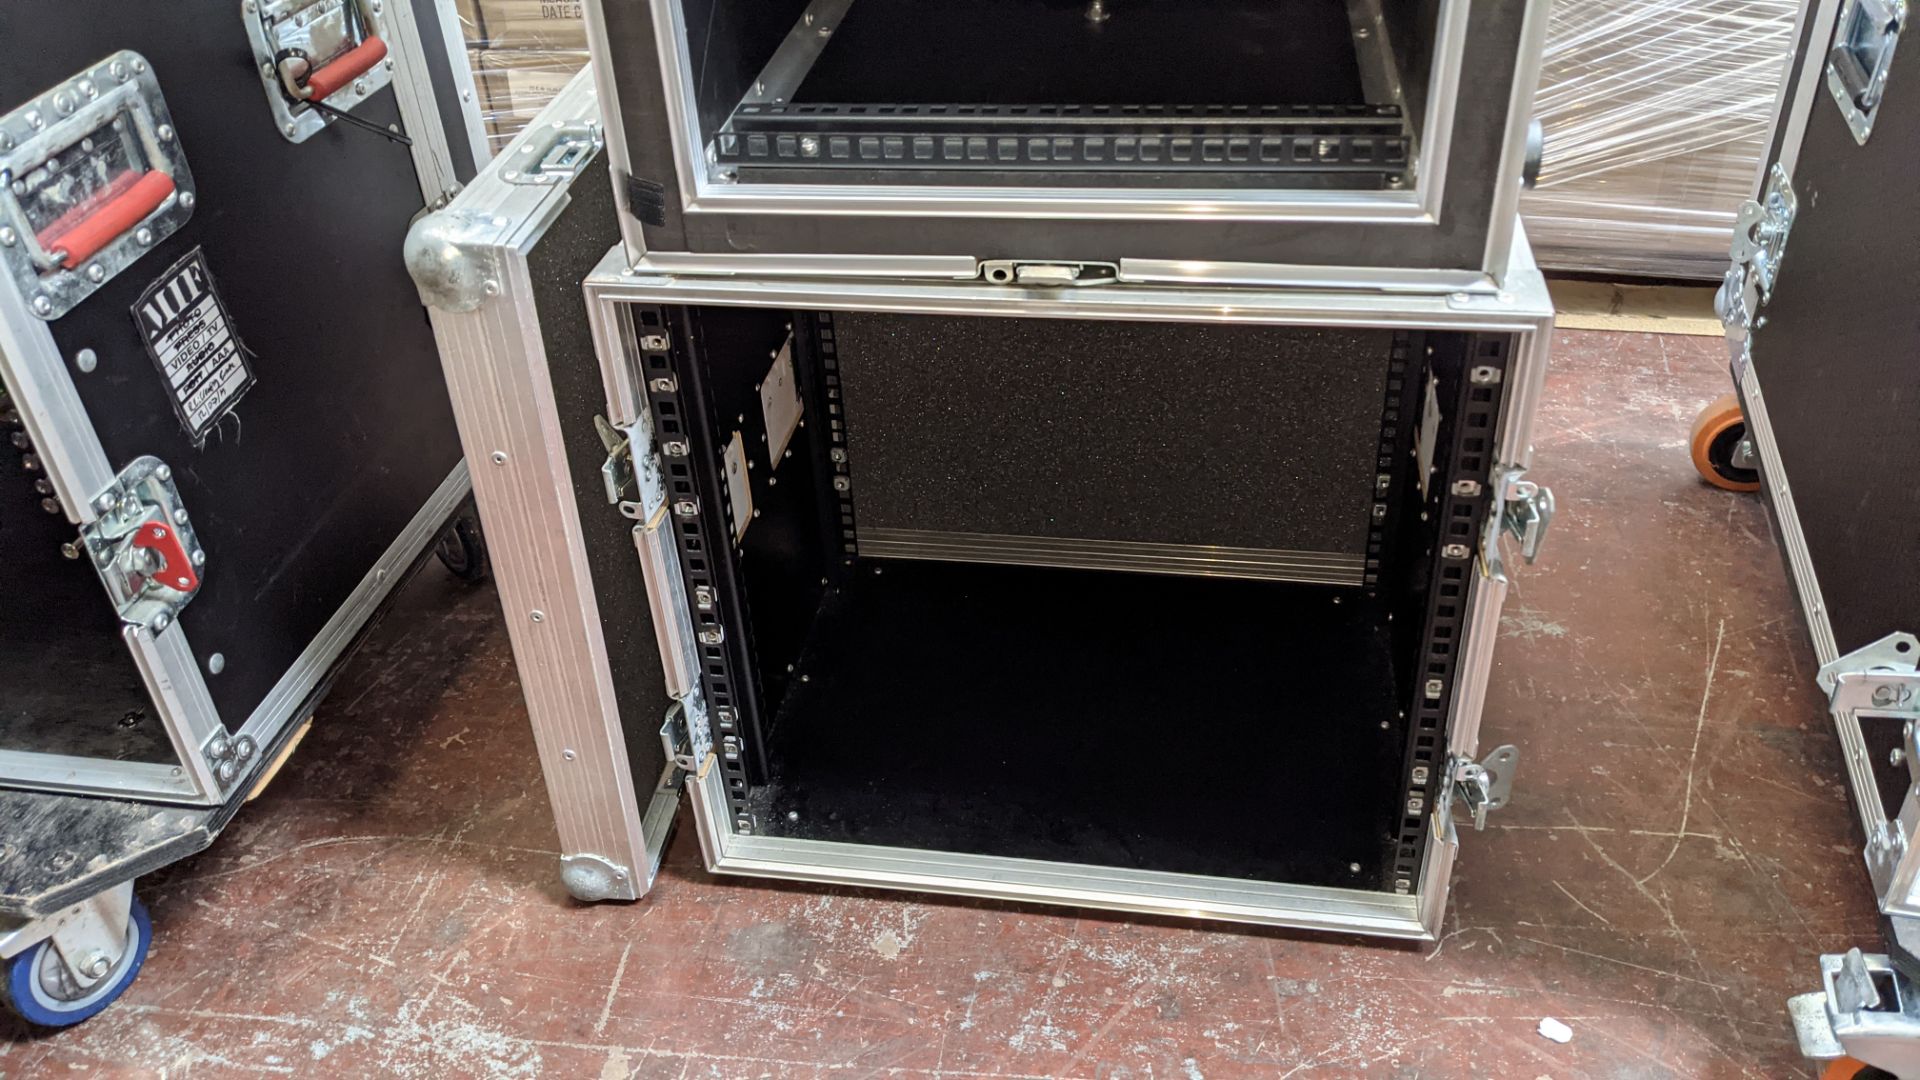 2 off racks comprising 1 off 8U & 1 off 10U, both incorporated into flight cases, one with a clip on - Image 5 of 8